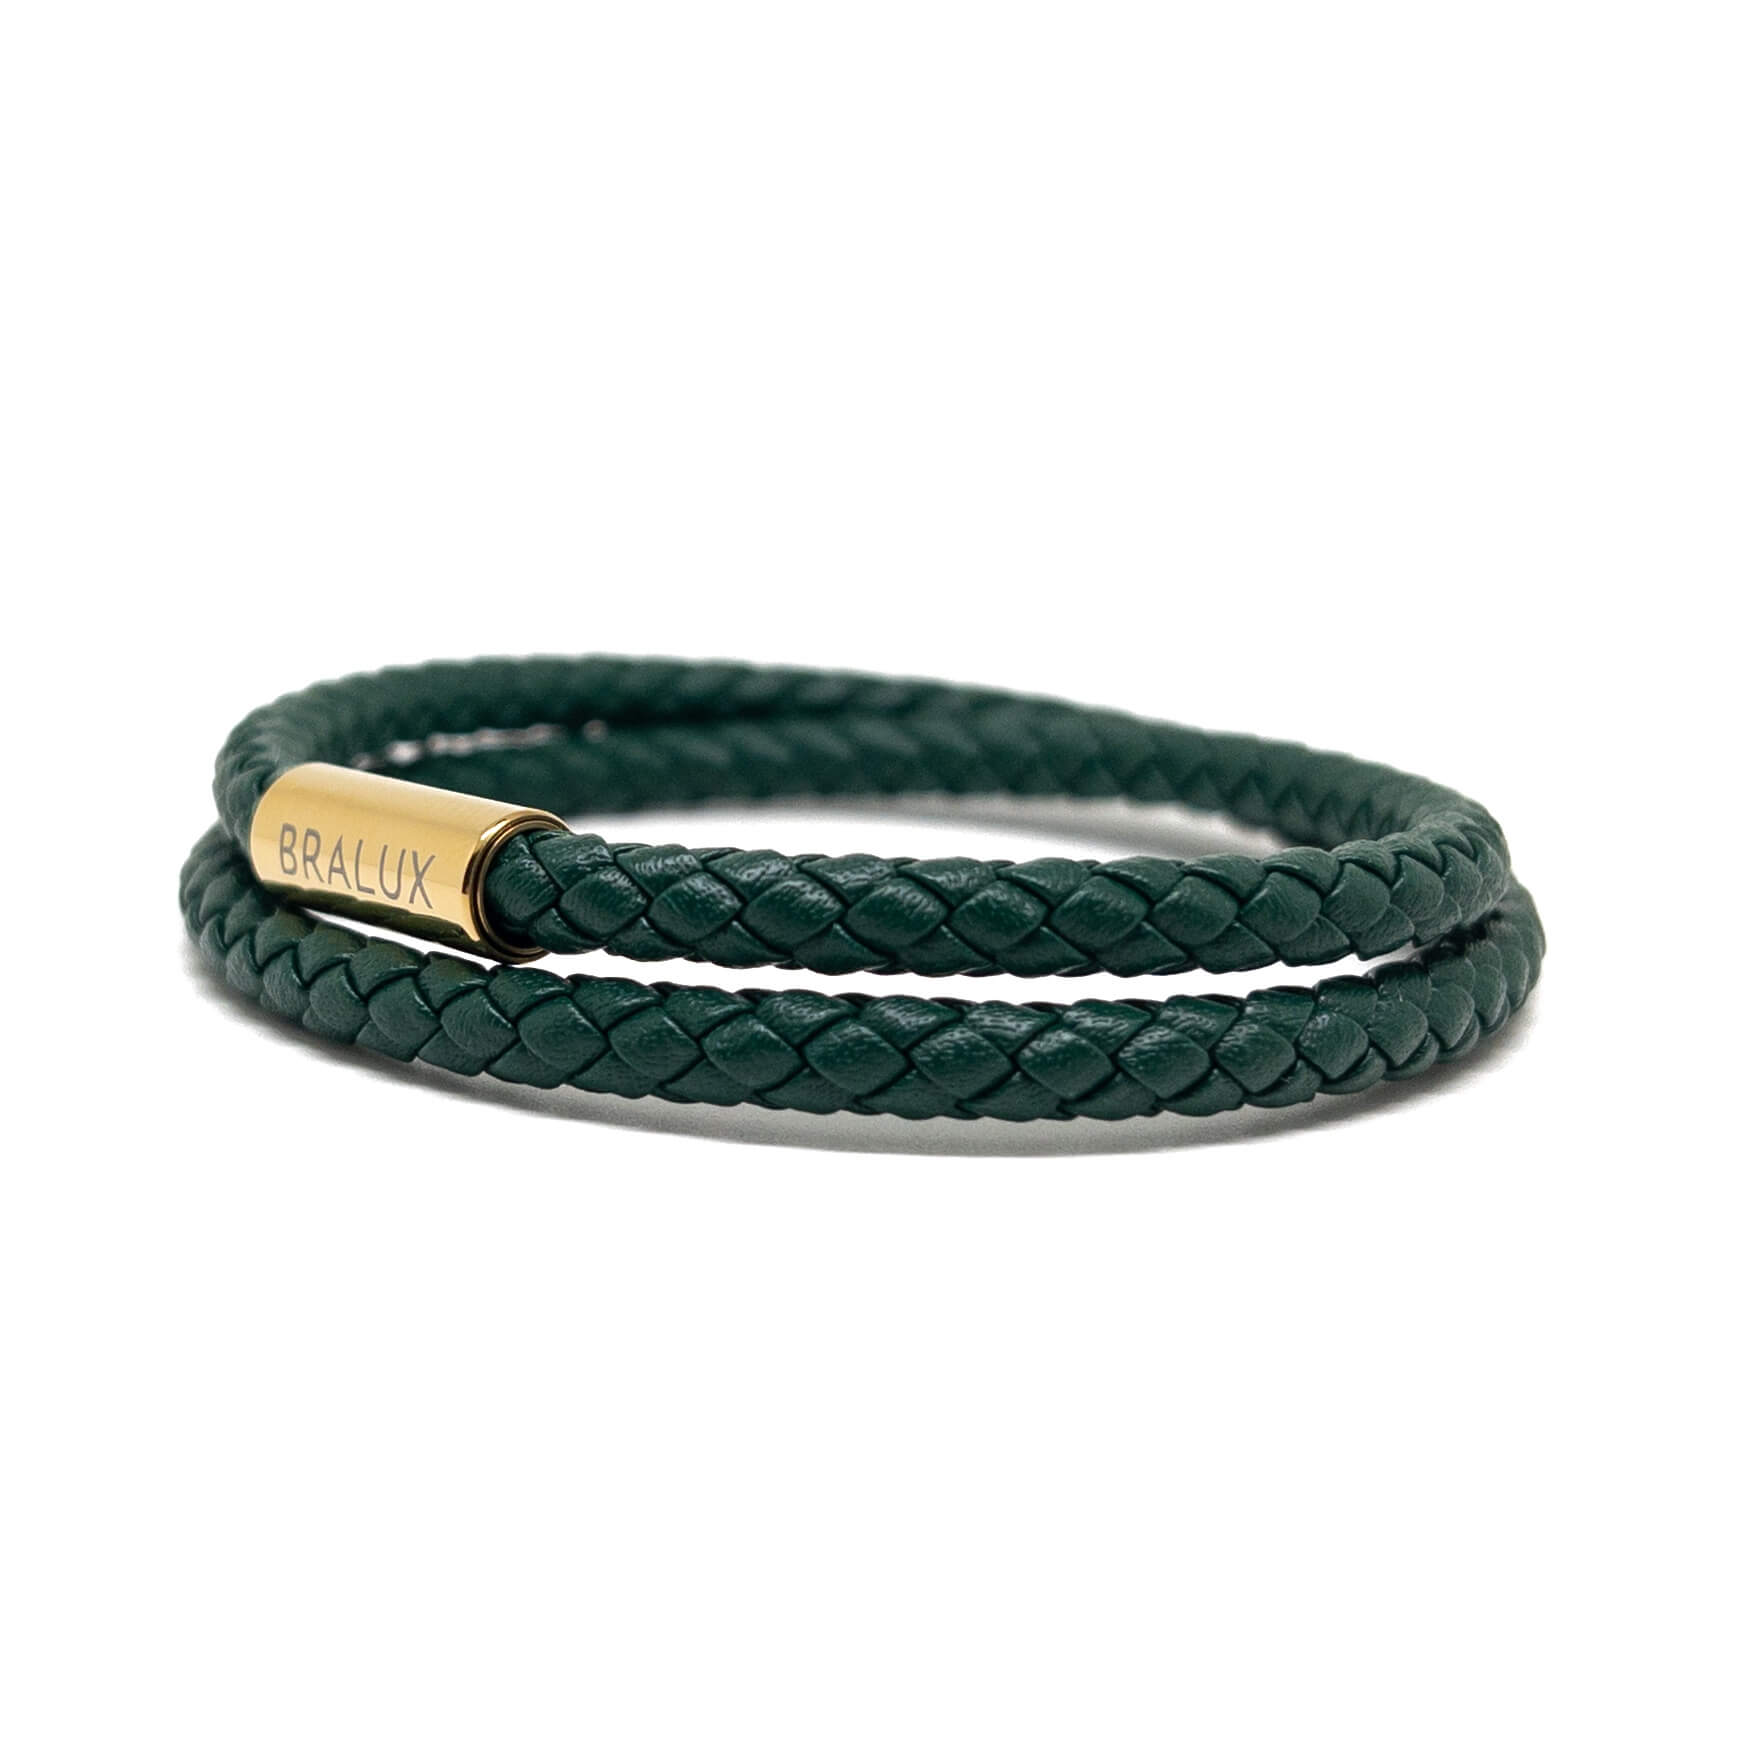 The Green Duo Leather Bracelet